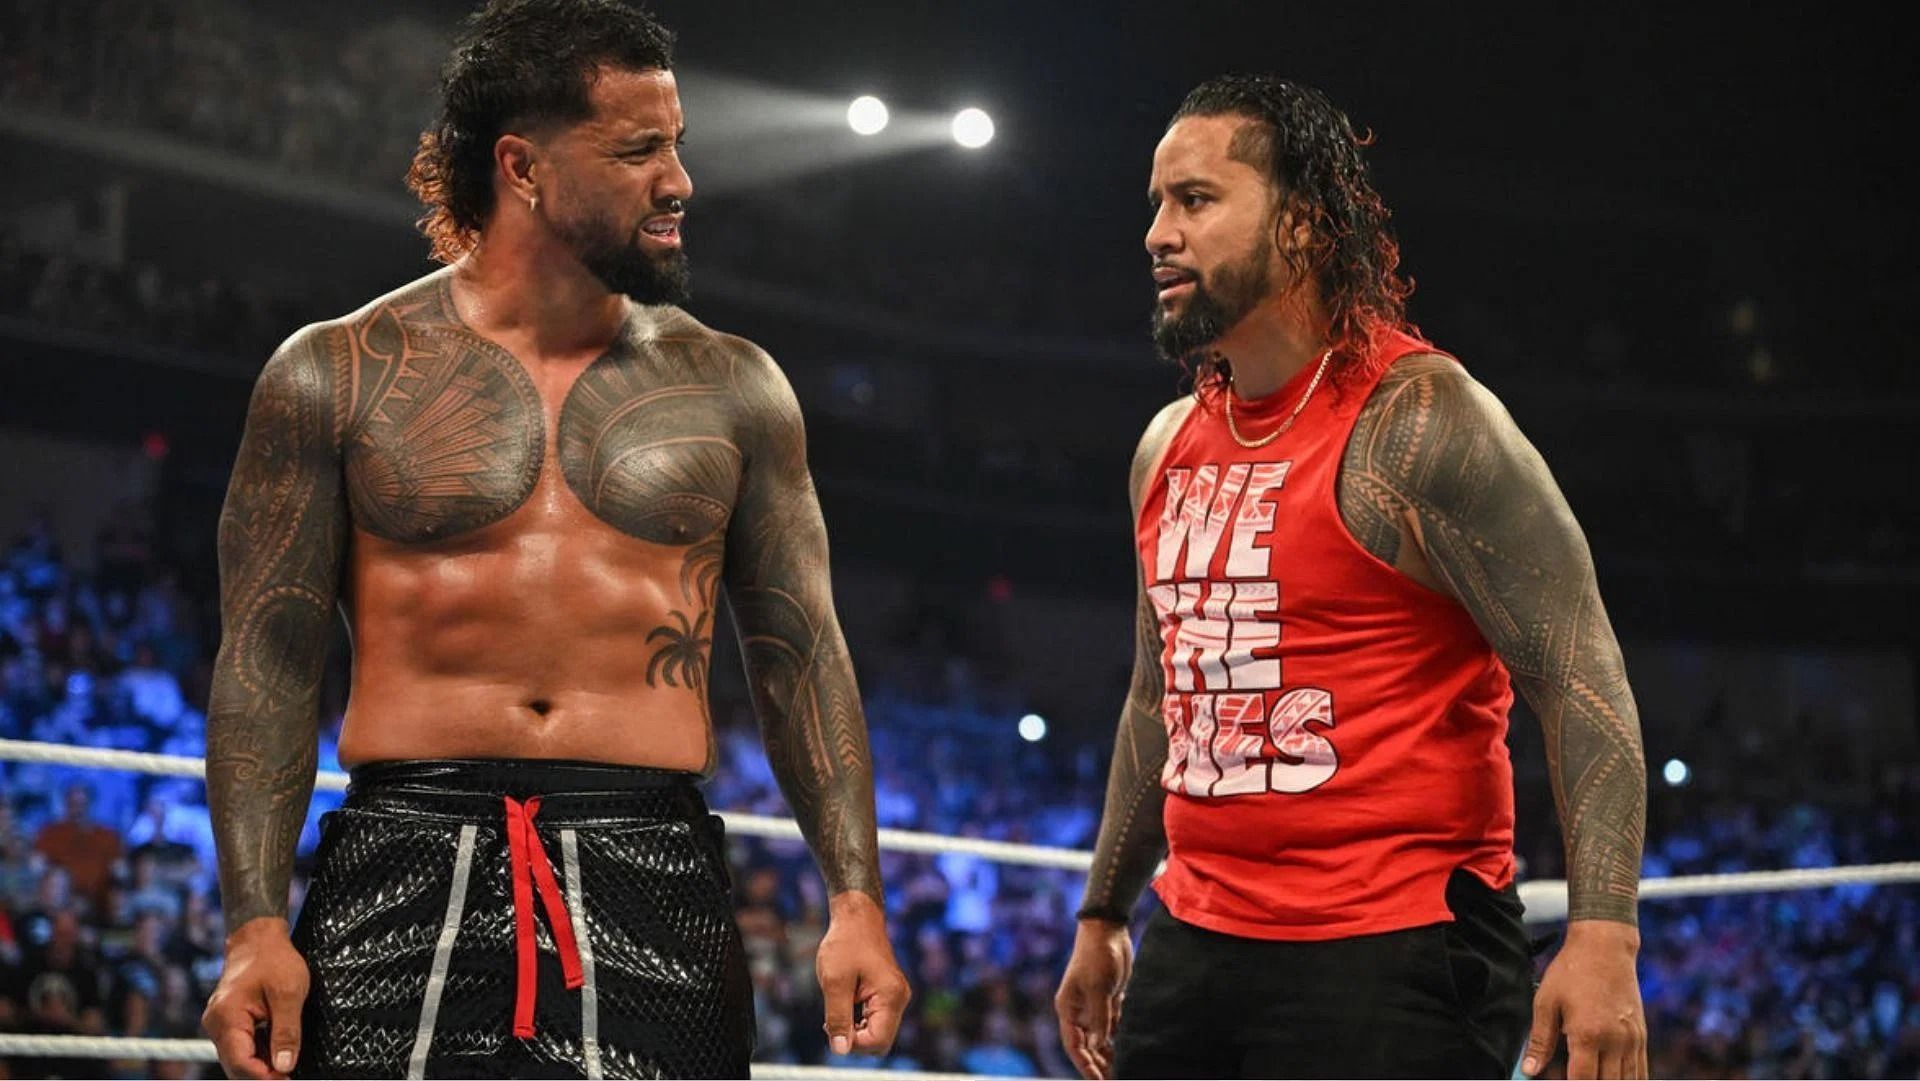 The Brother vs. Brother match between The Usos could happen soon